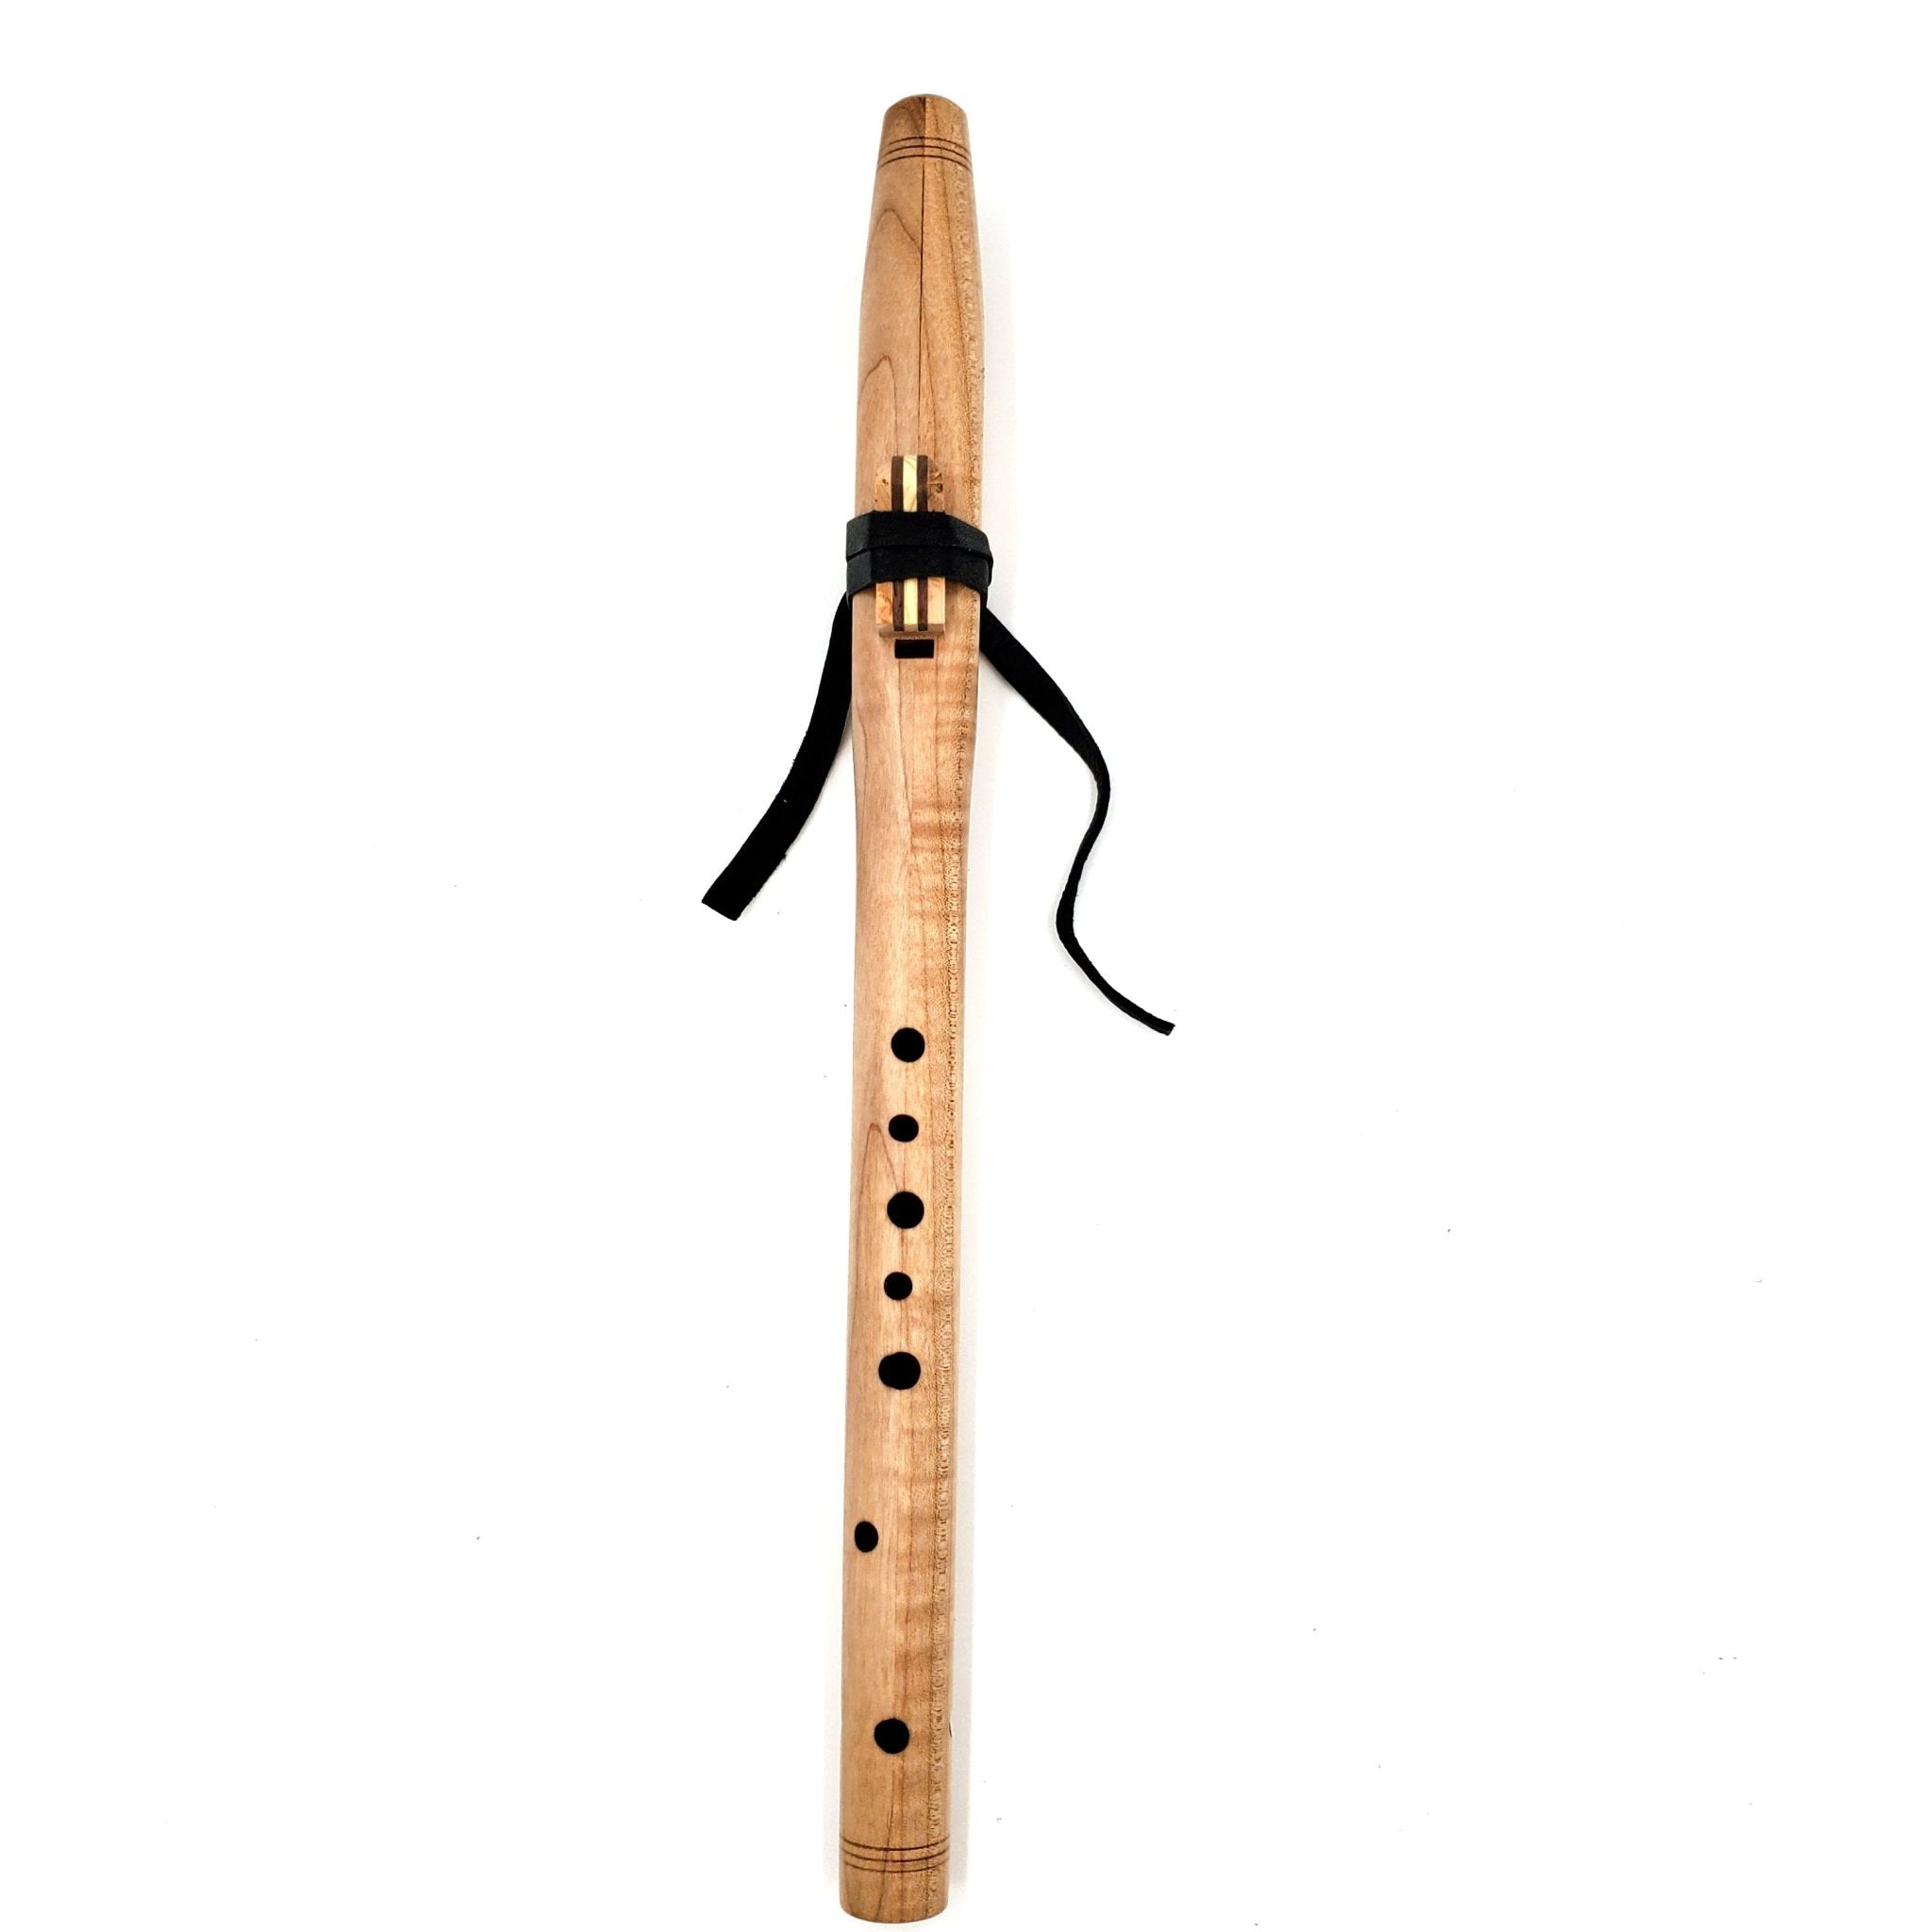 Figured Maple Hijaz Flute in the key of high C - #2409